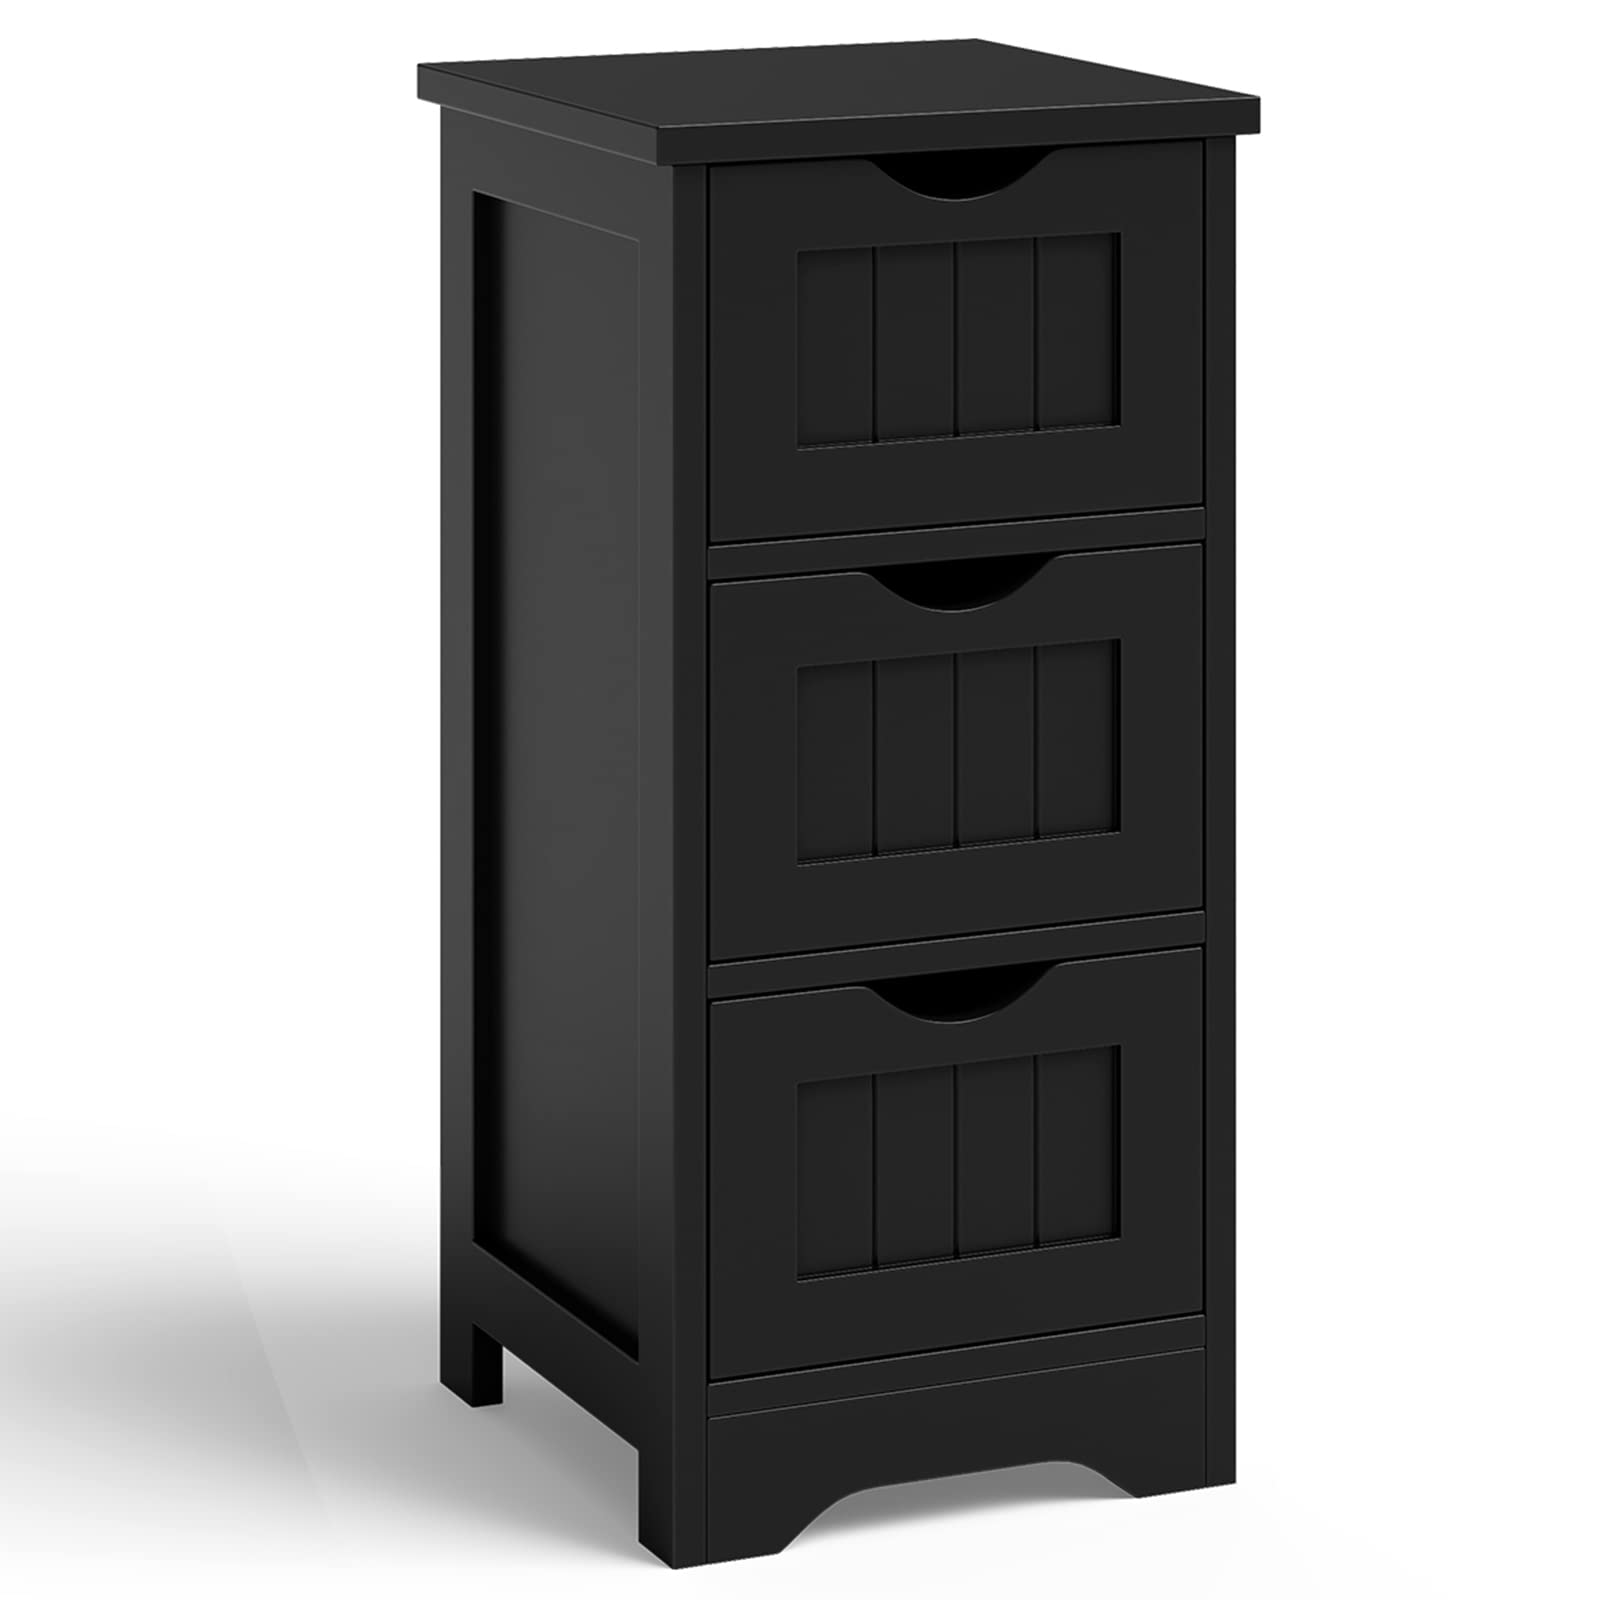 Giantex Bathroom Floor Cabinet - Small Bathroom Storage Cabinet with 3 Removable Drawers